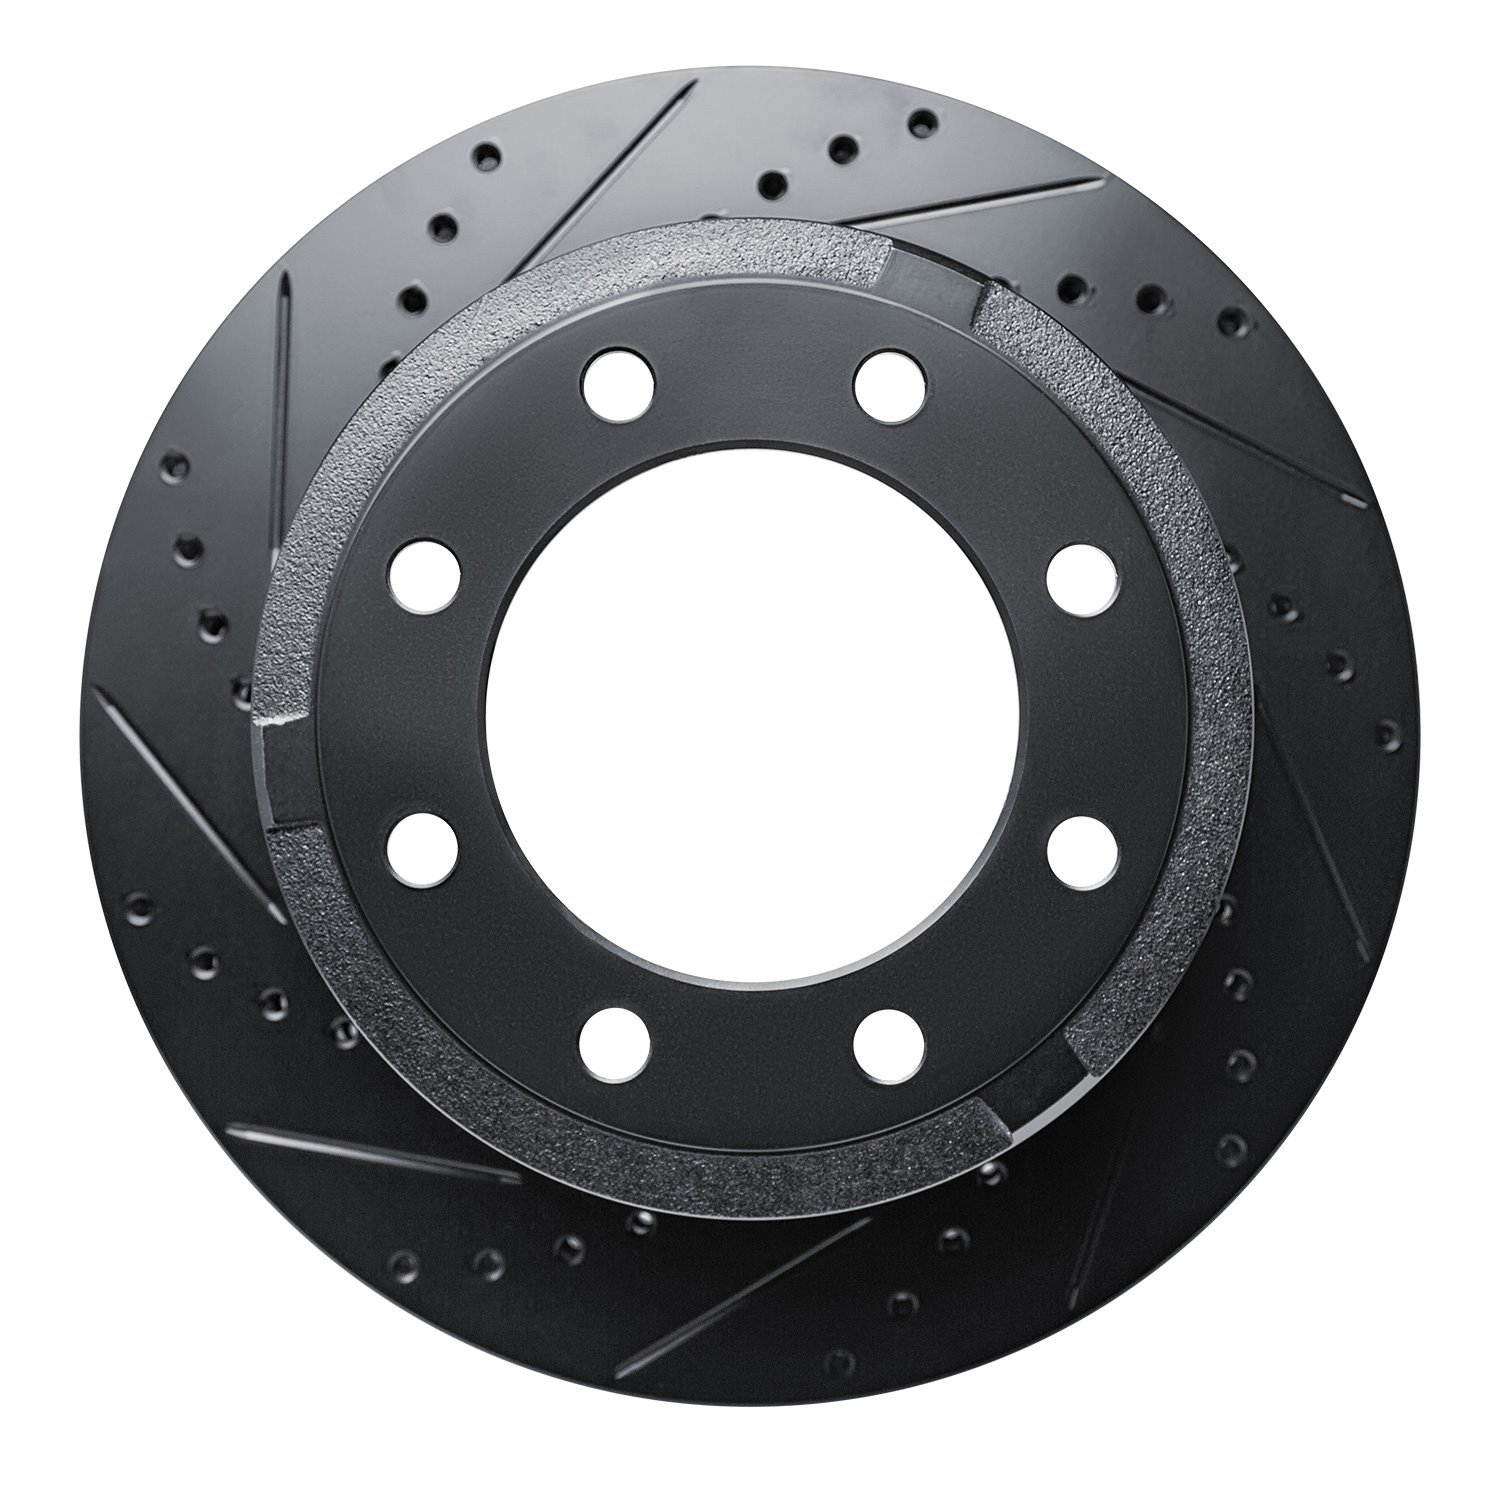 E-Line Drilled & Slotted Black Brake Rotor, Fits Select Ford/Lincoln/Mercury/Mazda, Position: Rear Left